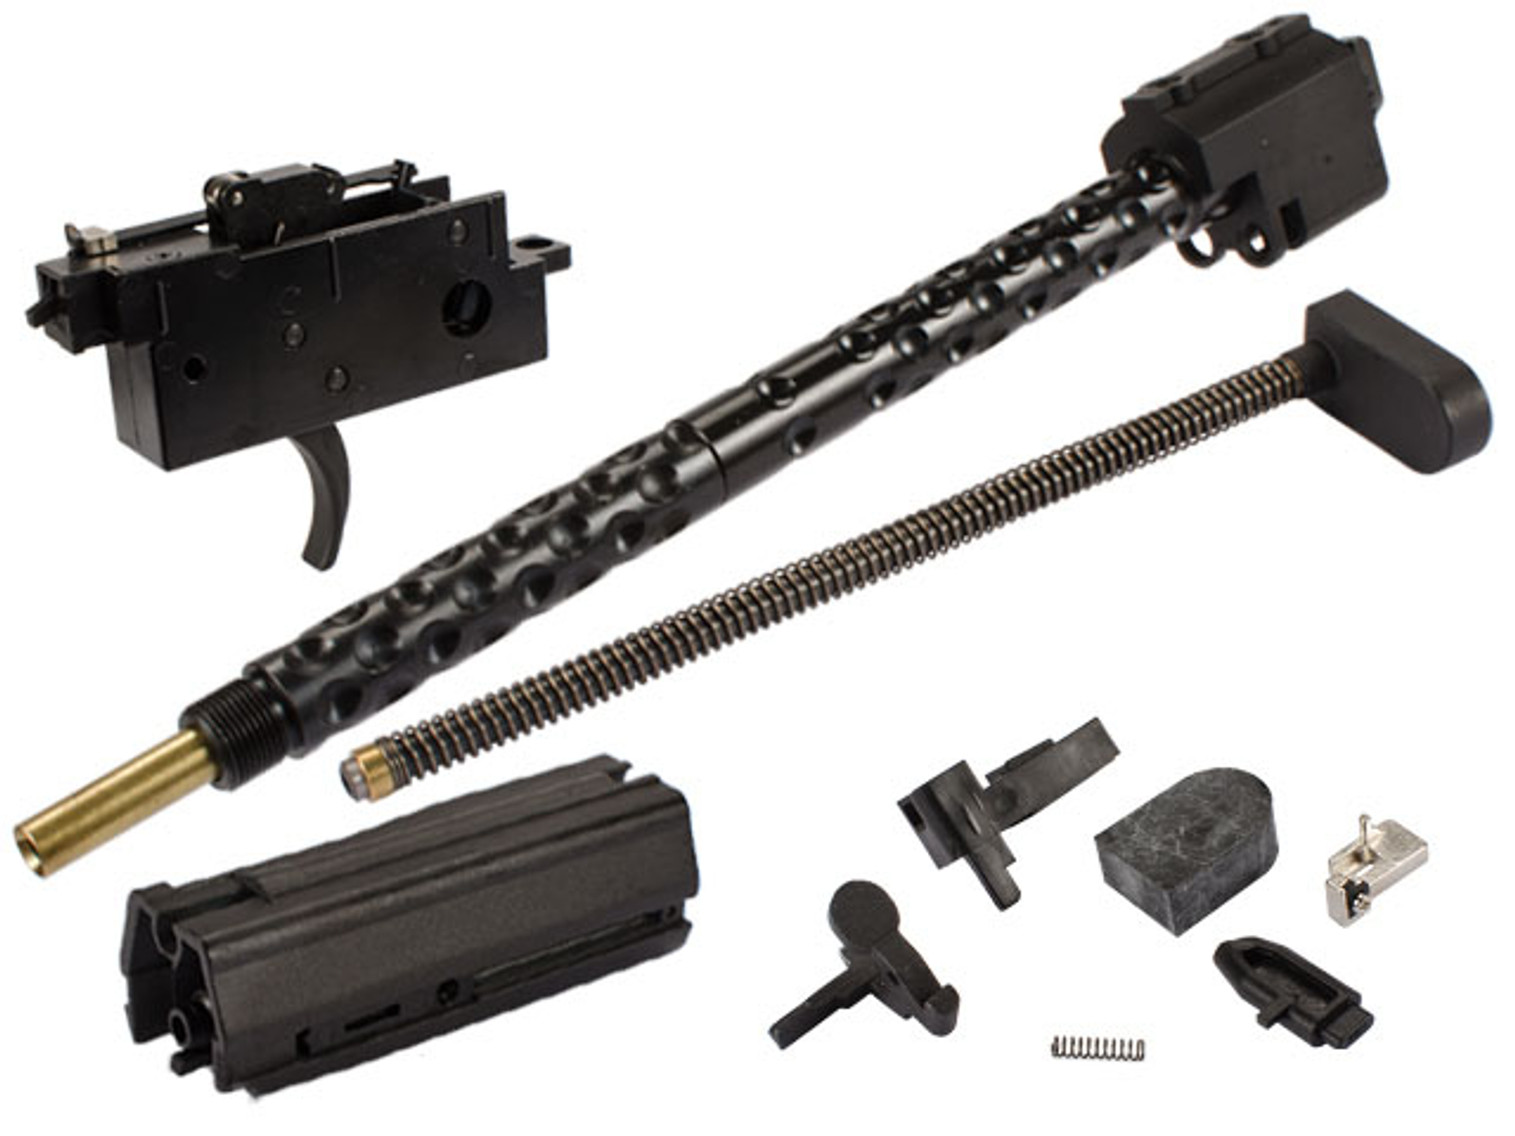 WE Gen3 "Open Bolt System" Complete Conversion Kit for WE PDW Airsoft GBB Rifle - Long Type